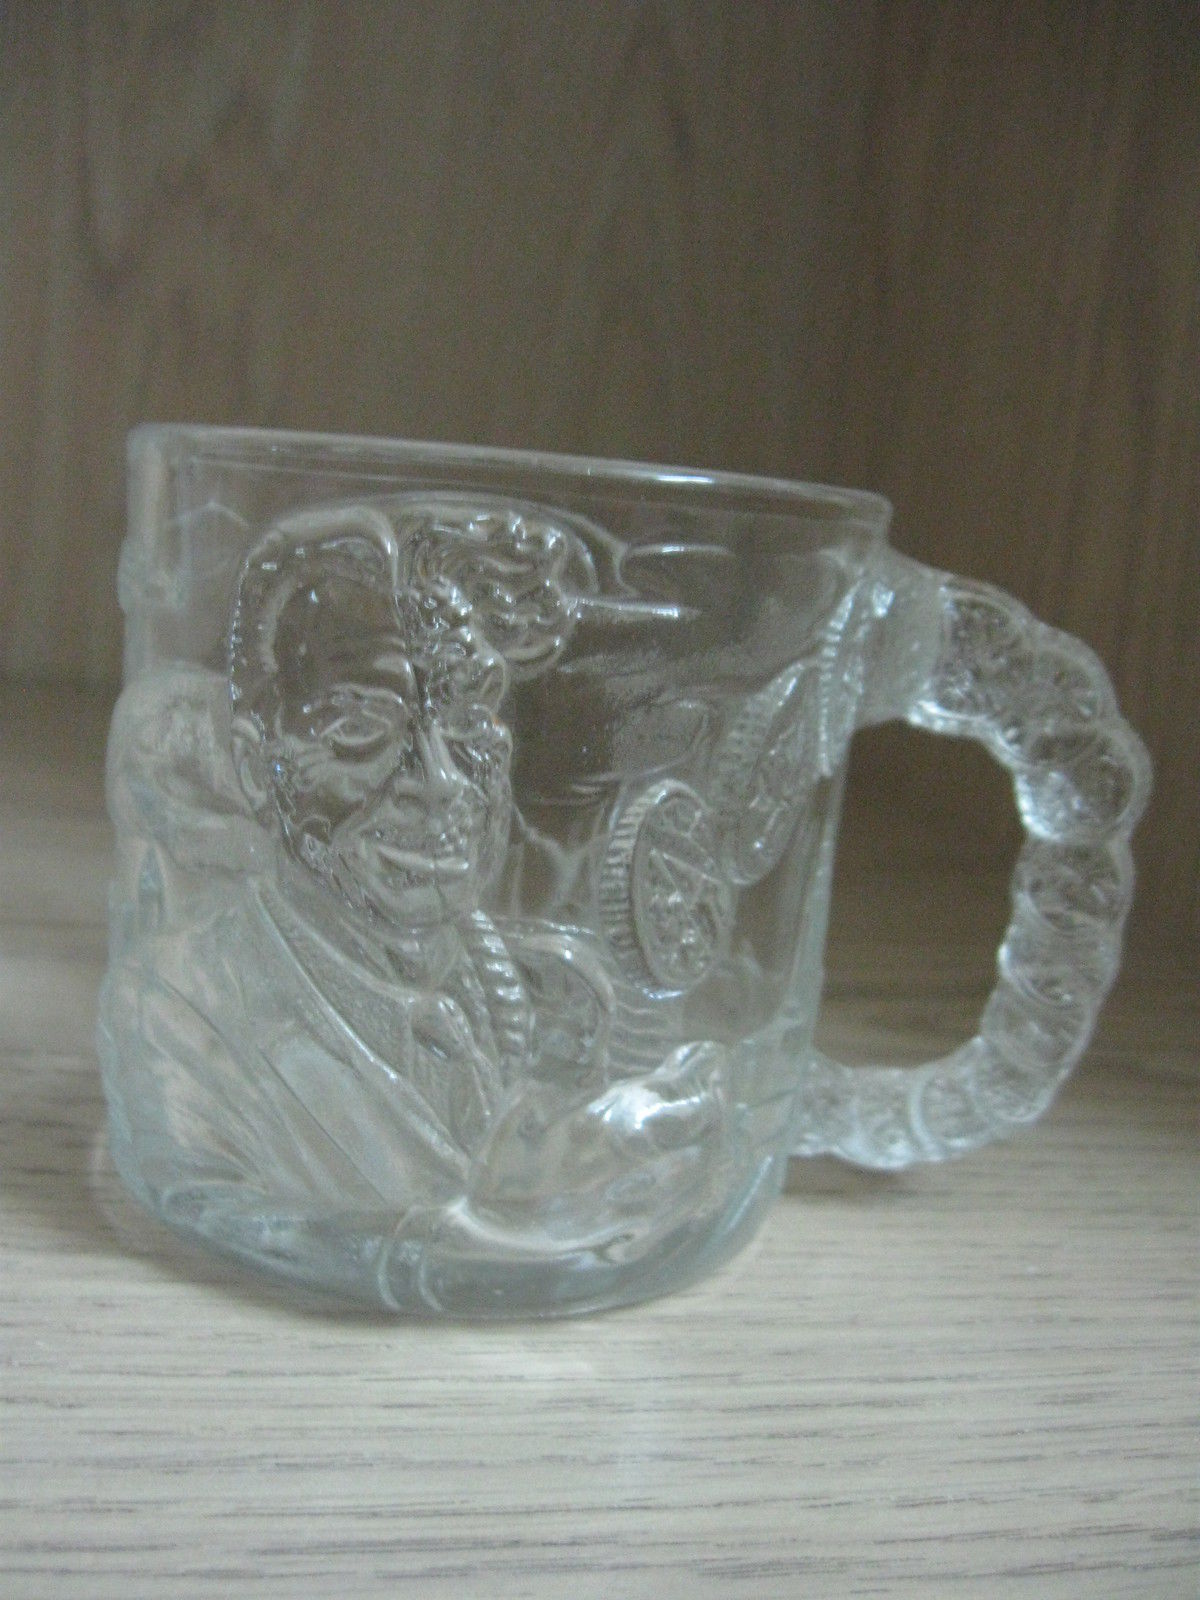 McDonald's Promotion Two-Face Qty 1 Cut Glass Mug Made In France 1995 - $9.95